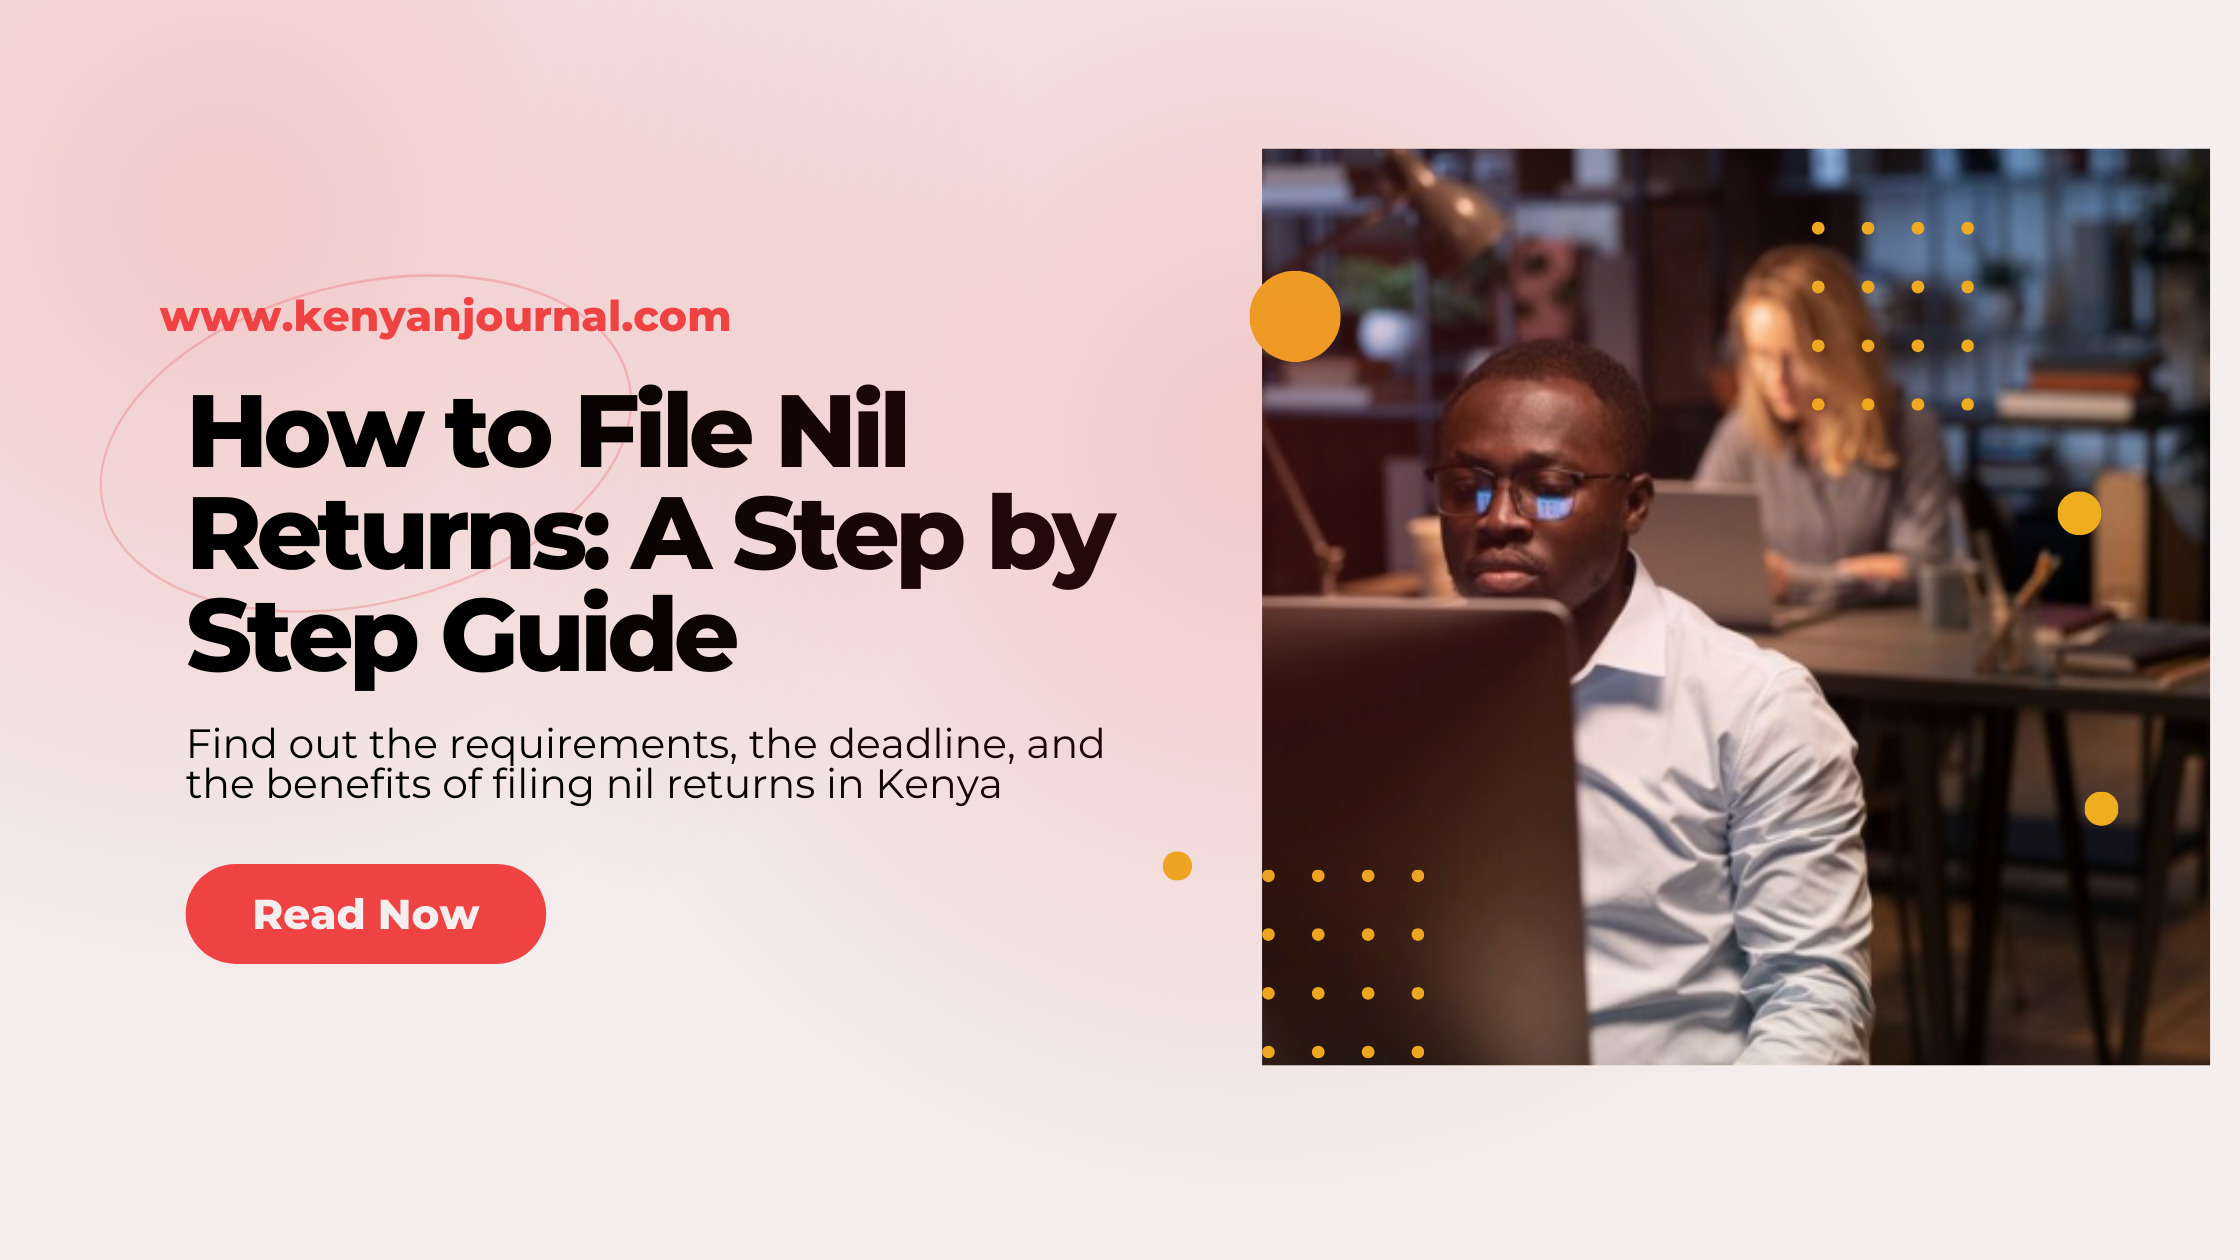 An infographic showing a man filing nil returns